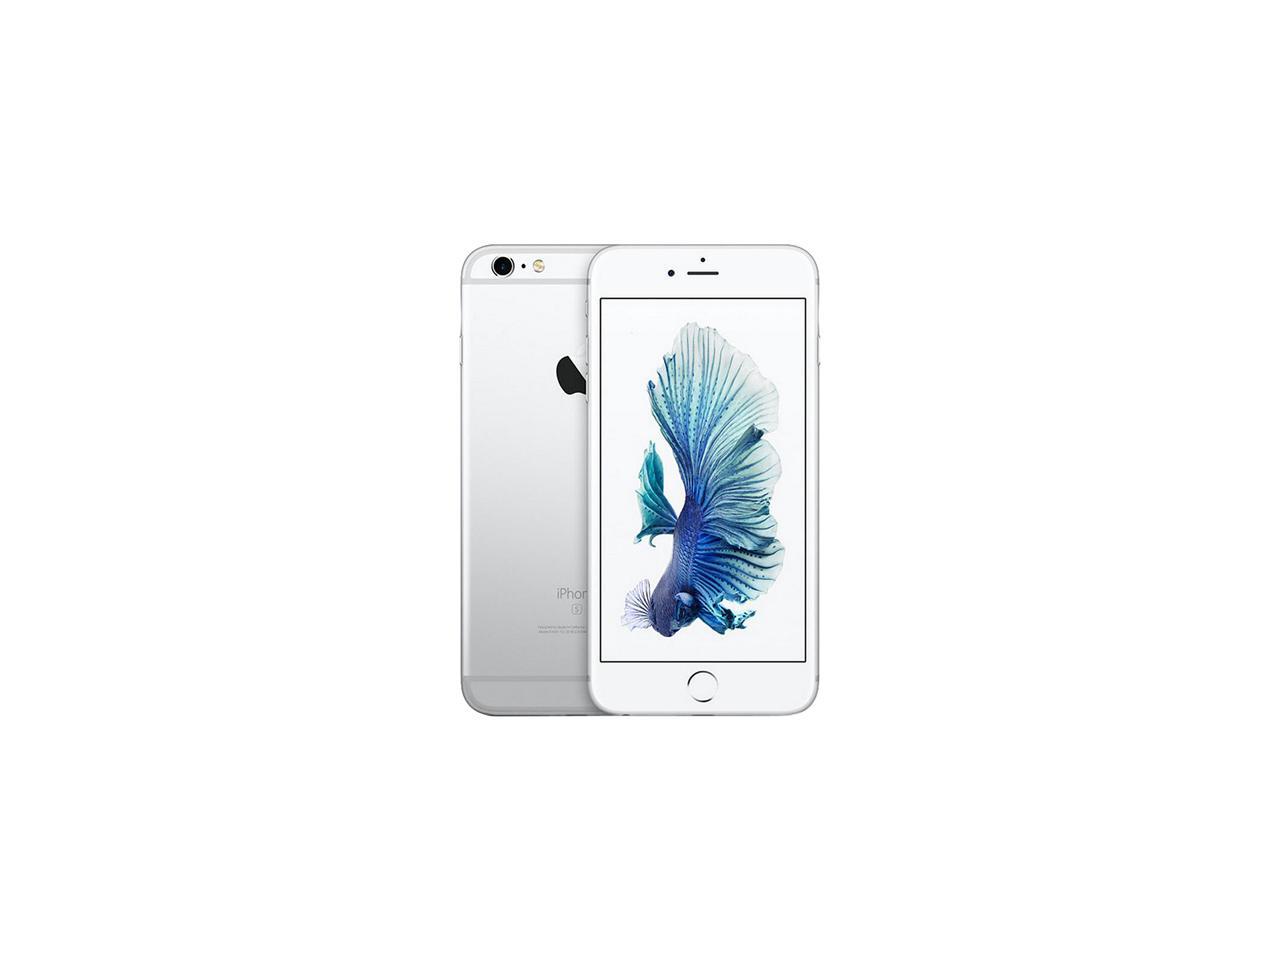 Apple iPhone 6s 16GB 4G LTE Unlocked Cell Phone with 2GB RAM (Silver)